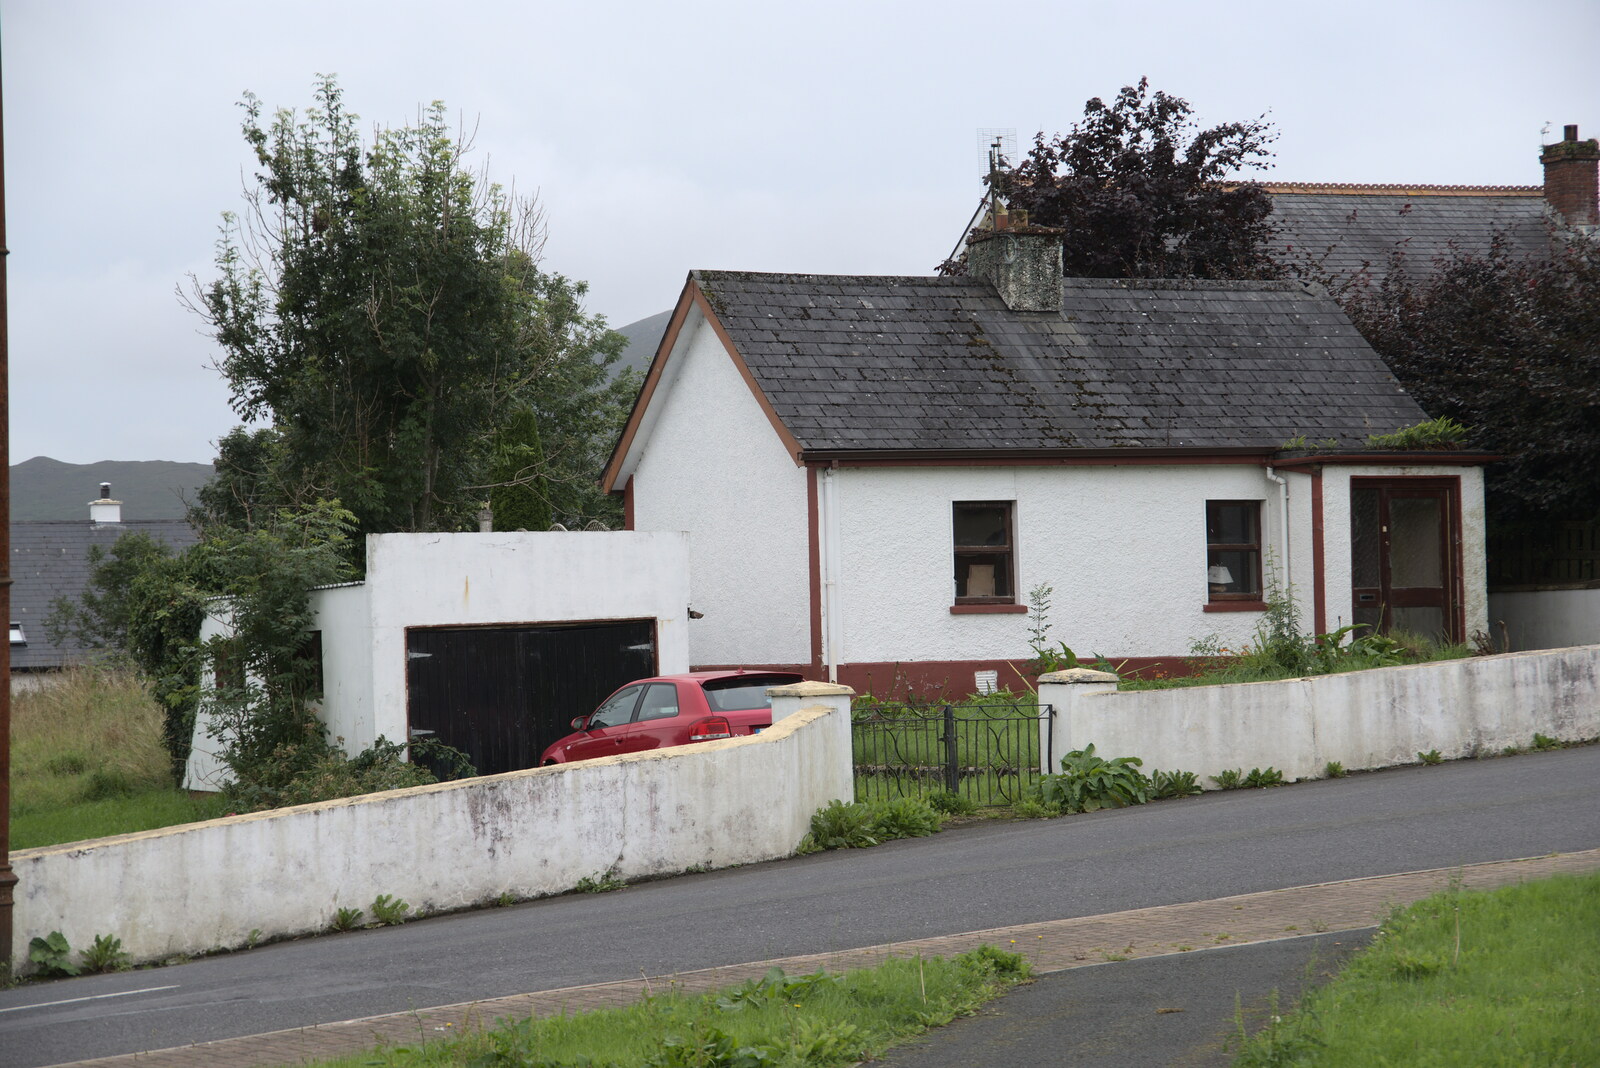 A bungalow on a hill from Manorhamilton and the Street Art of Dún Laoghaire, Ireland - 15th August 2021